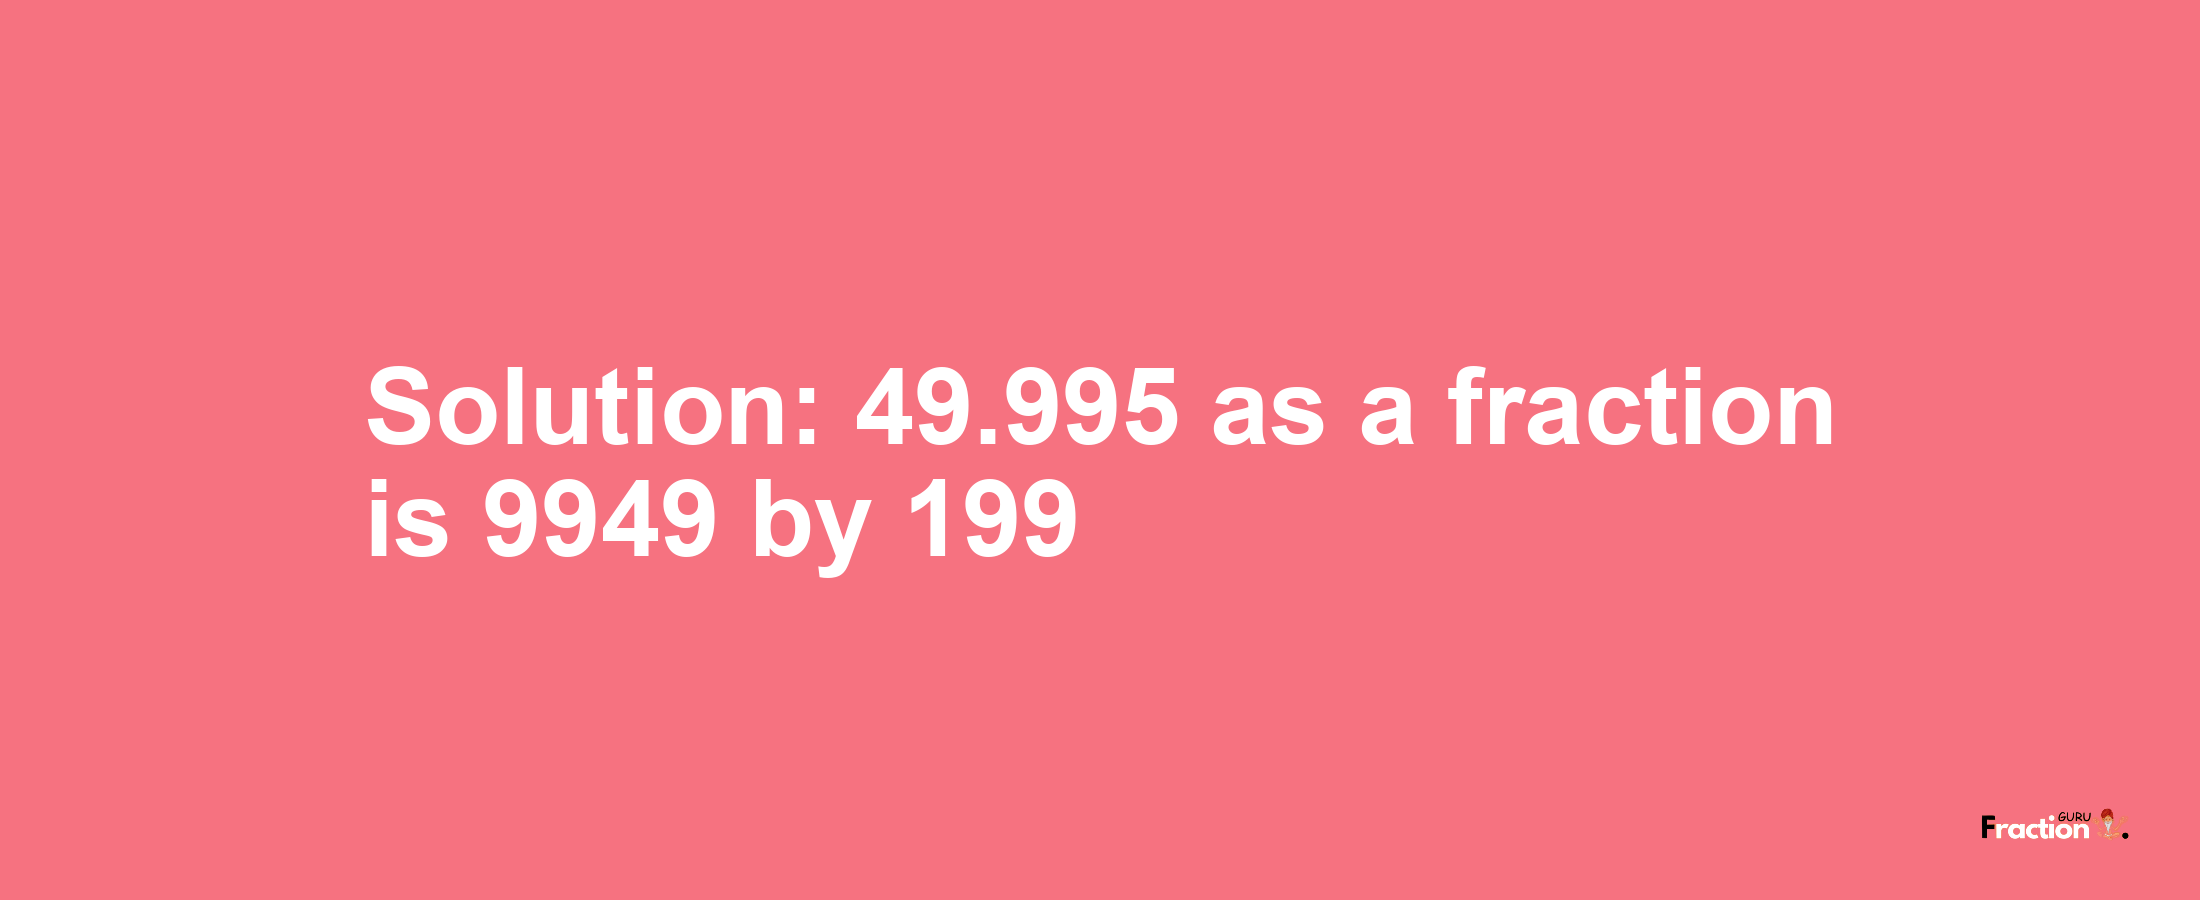 Solution:49.995 as a fraction is 9949/199